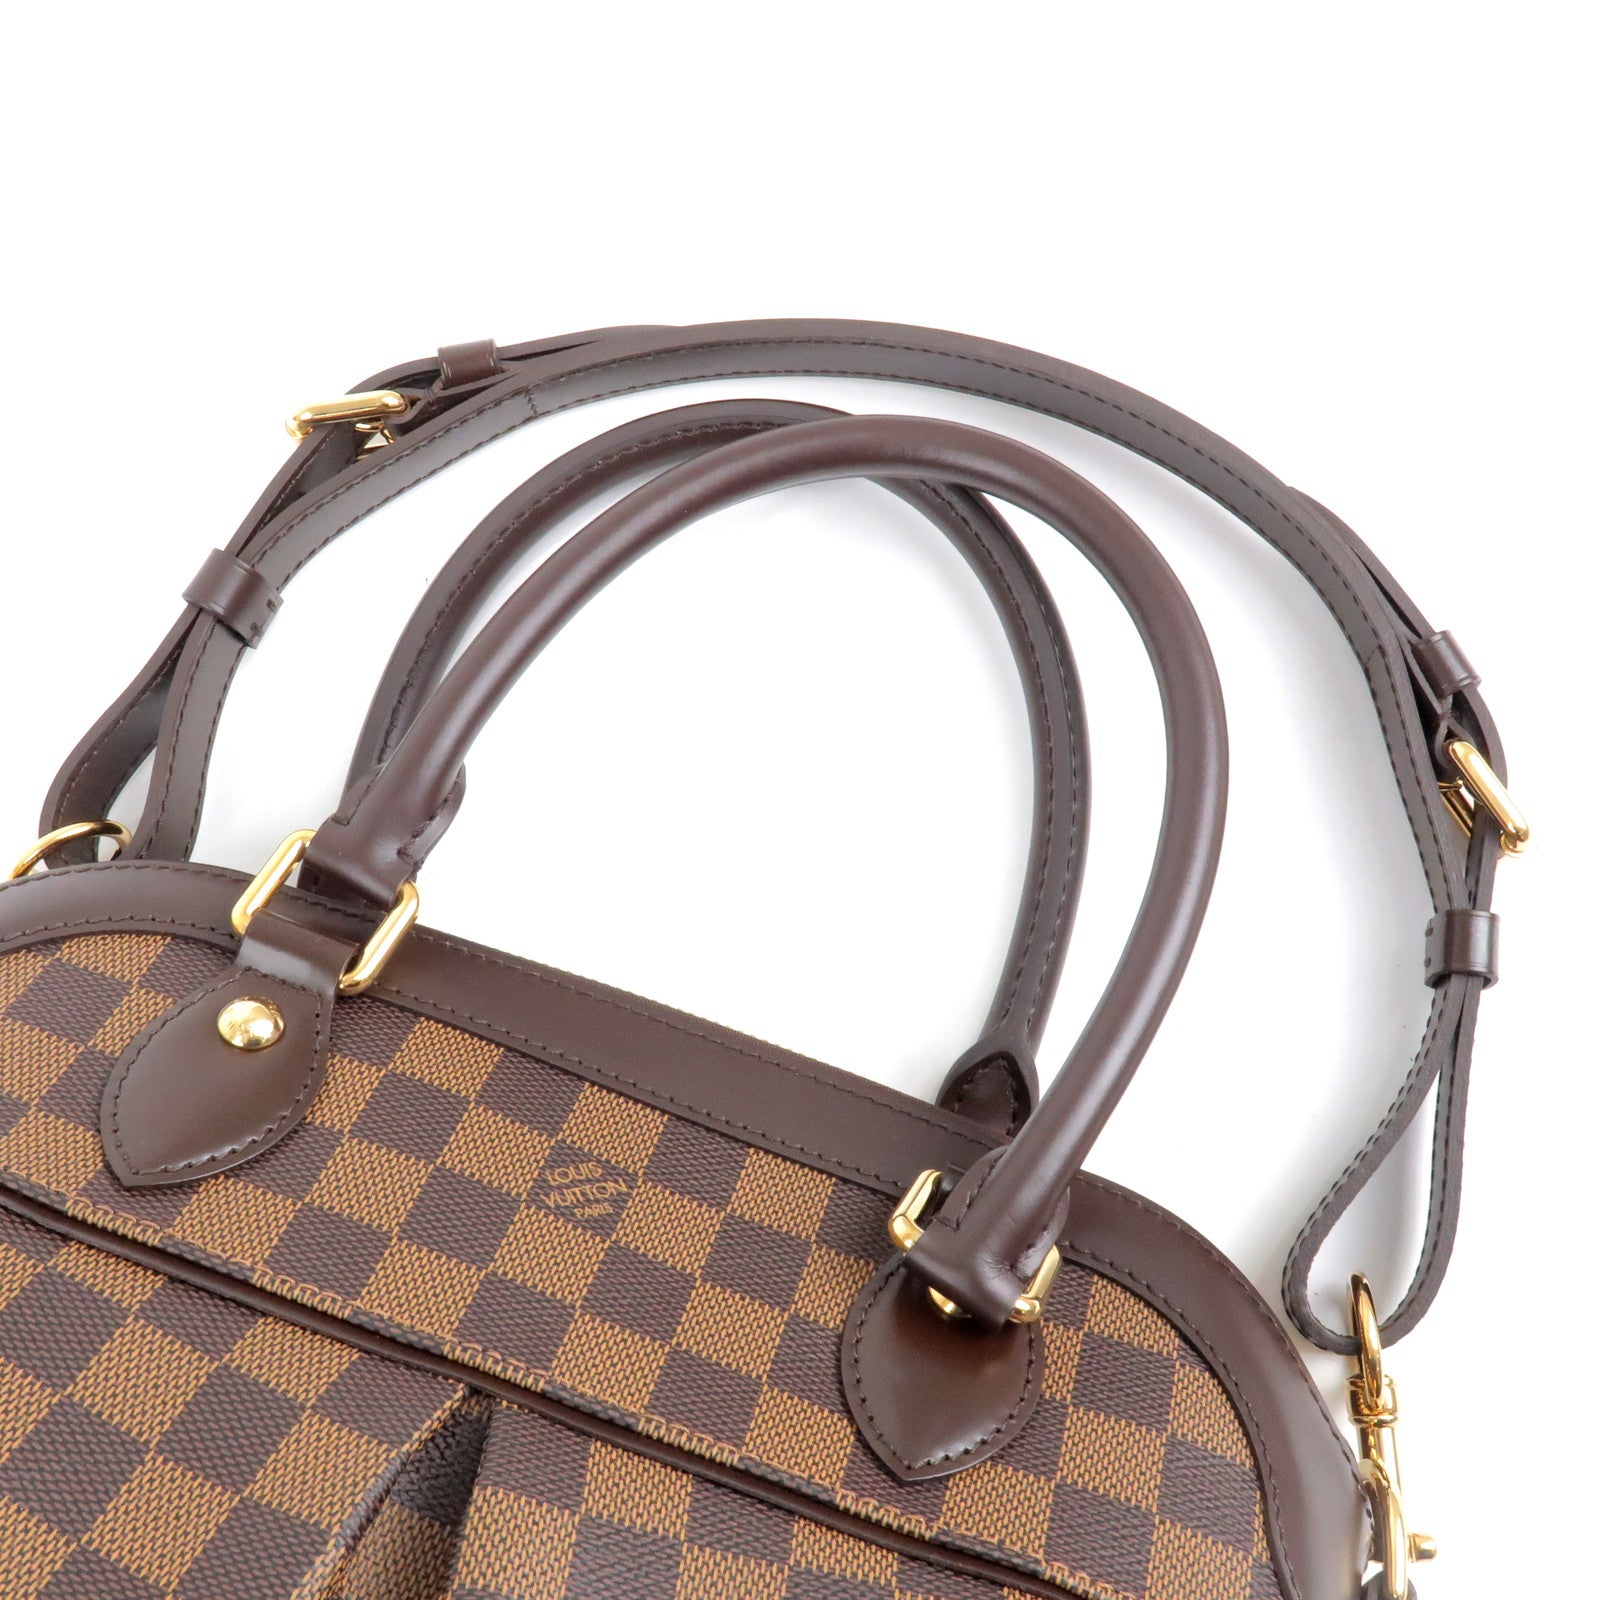 EVERYTHING YOU NEED TO KNOW ABOUT THE LOUIS VUITTON TREVI PM 